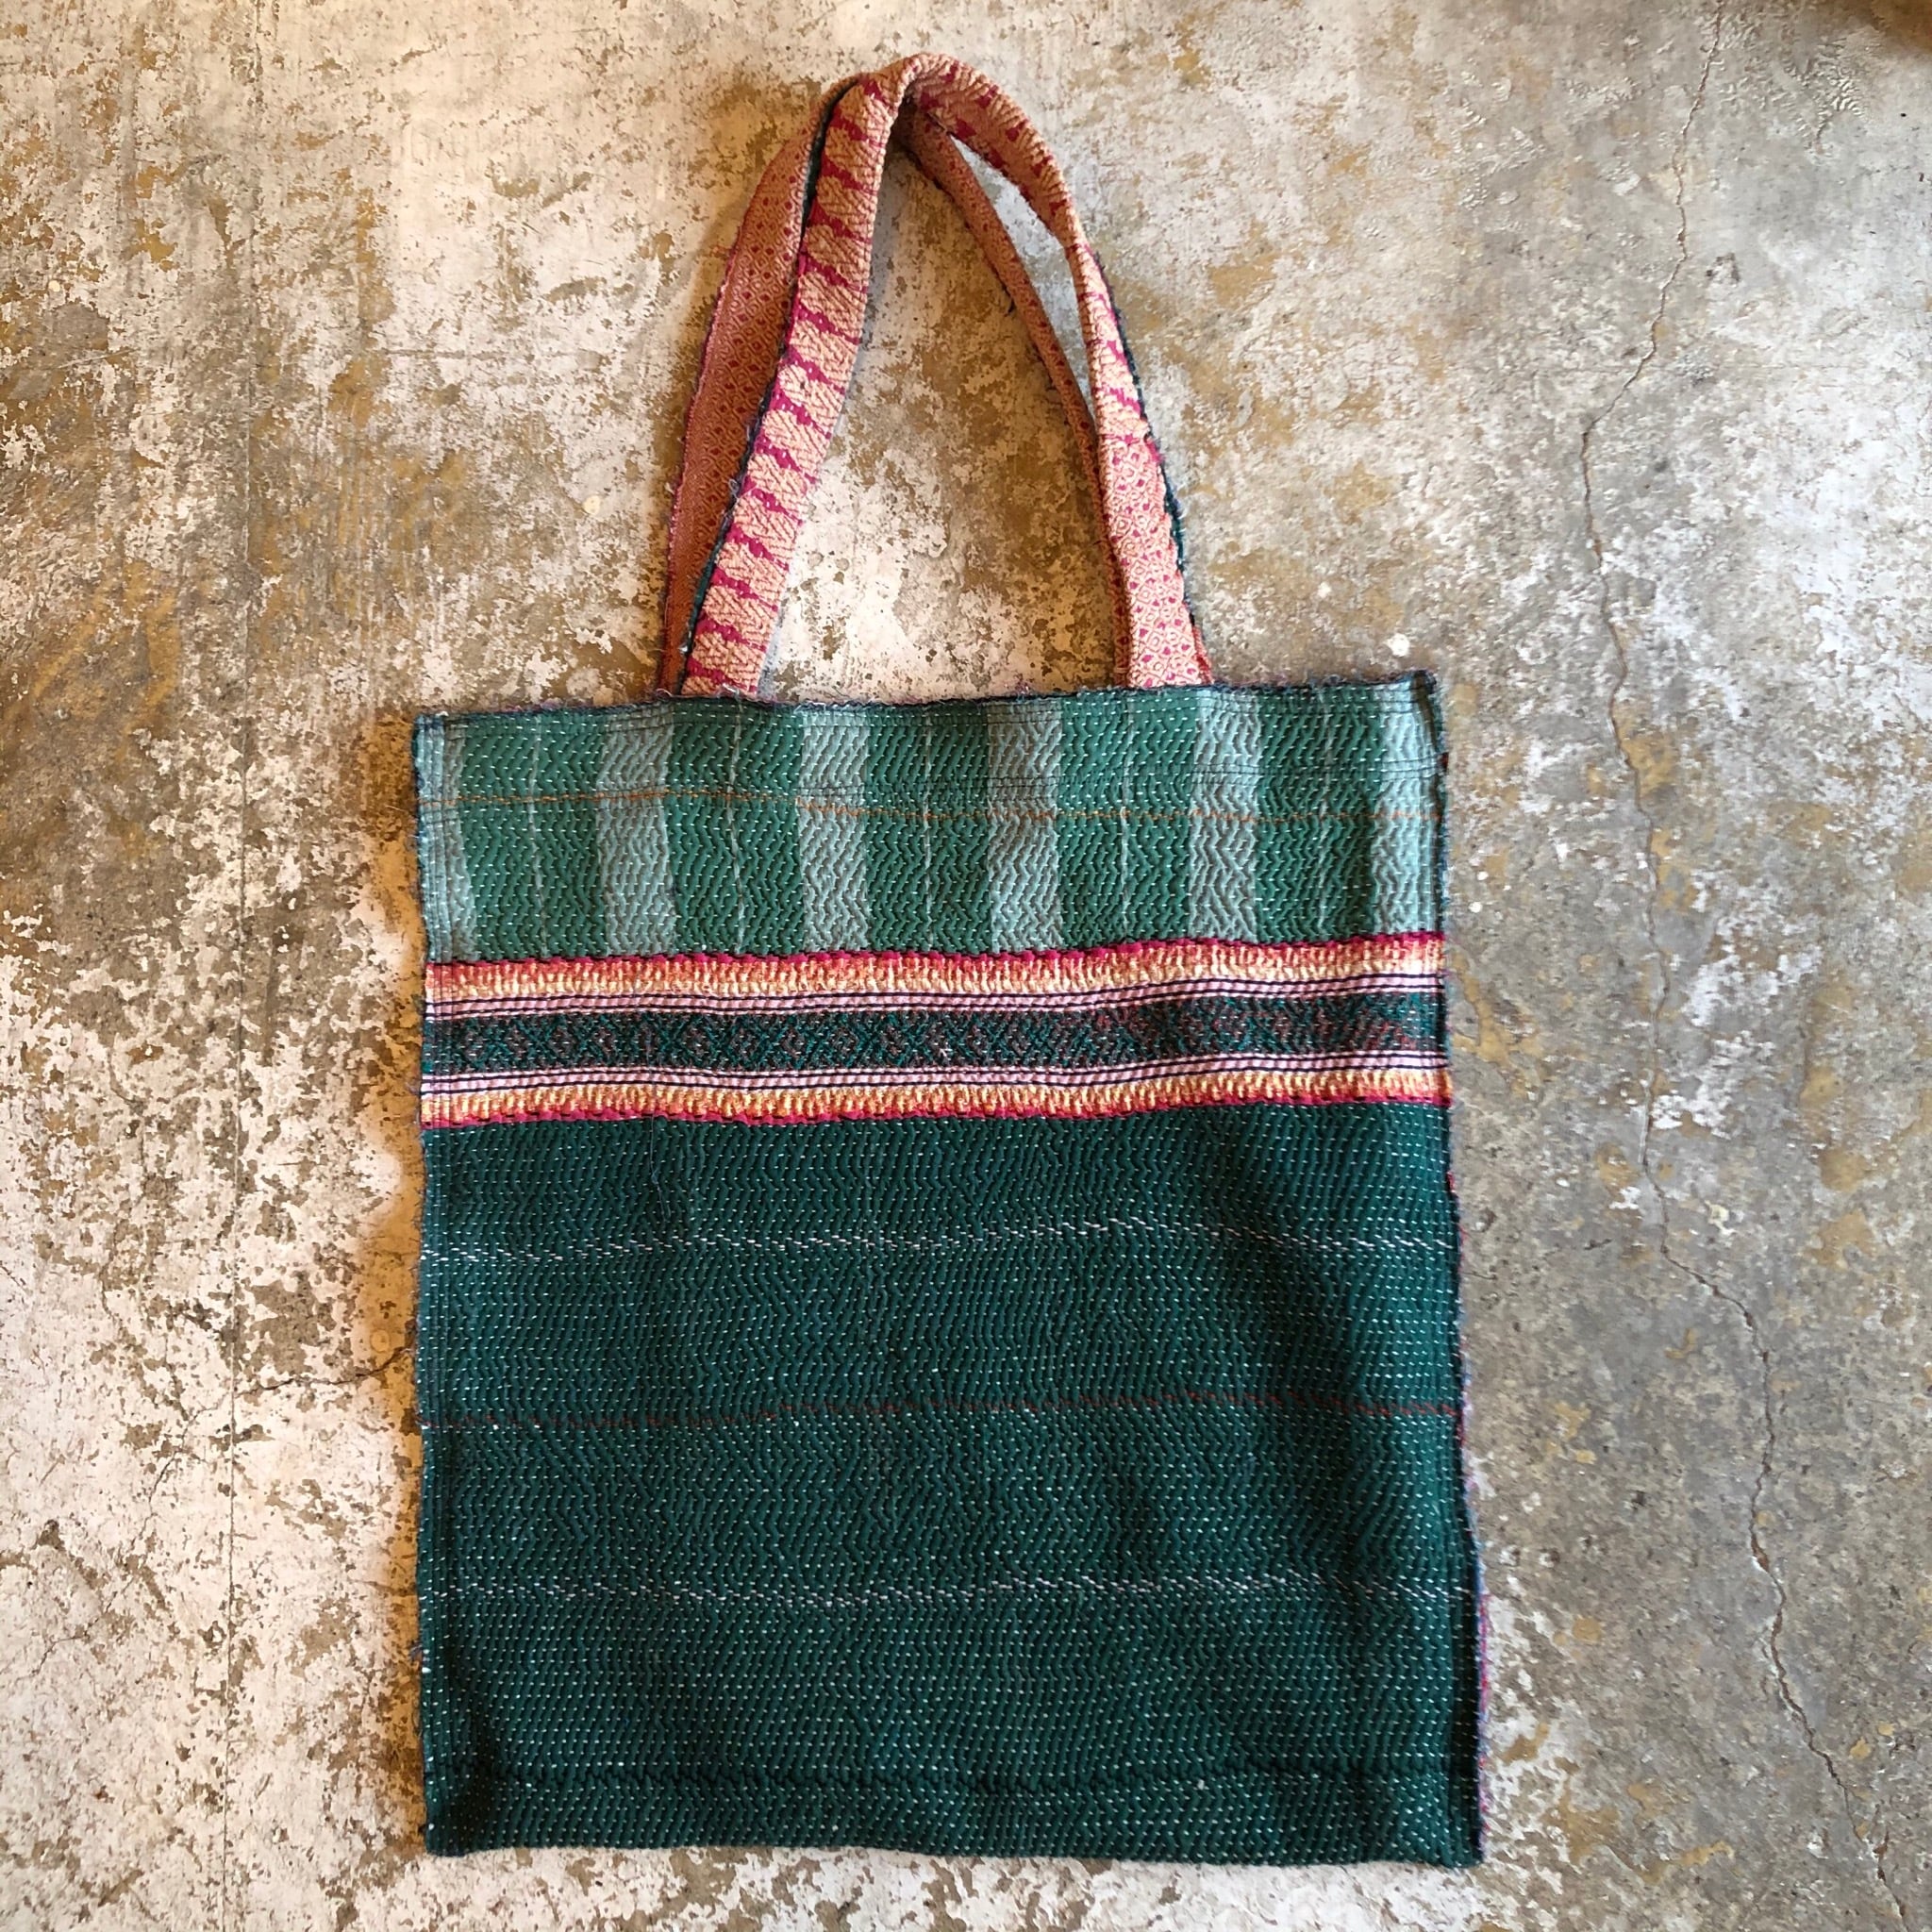 【Vintage】カンタ刺繍のトートバッグ②